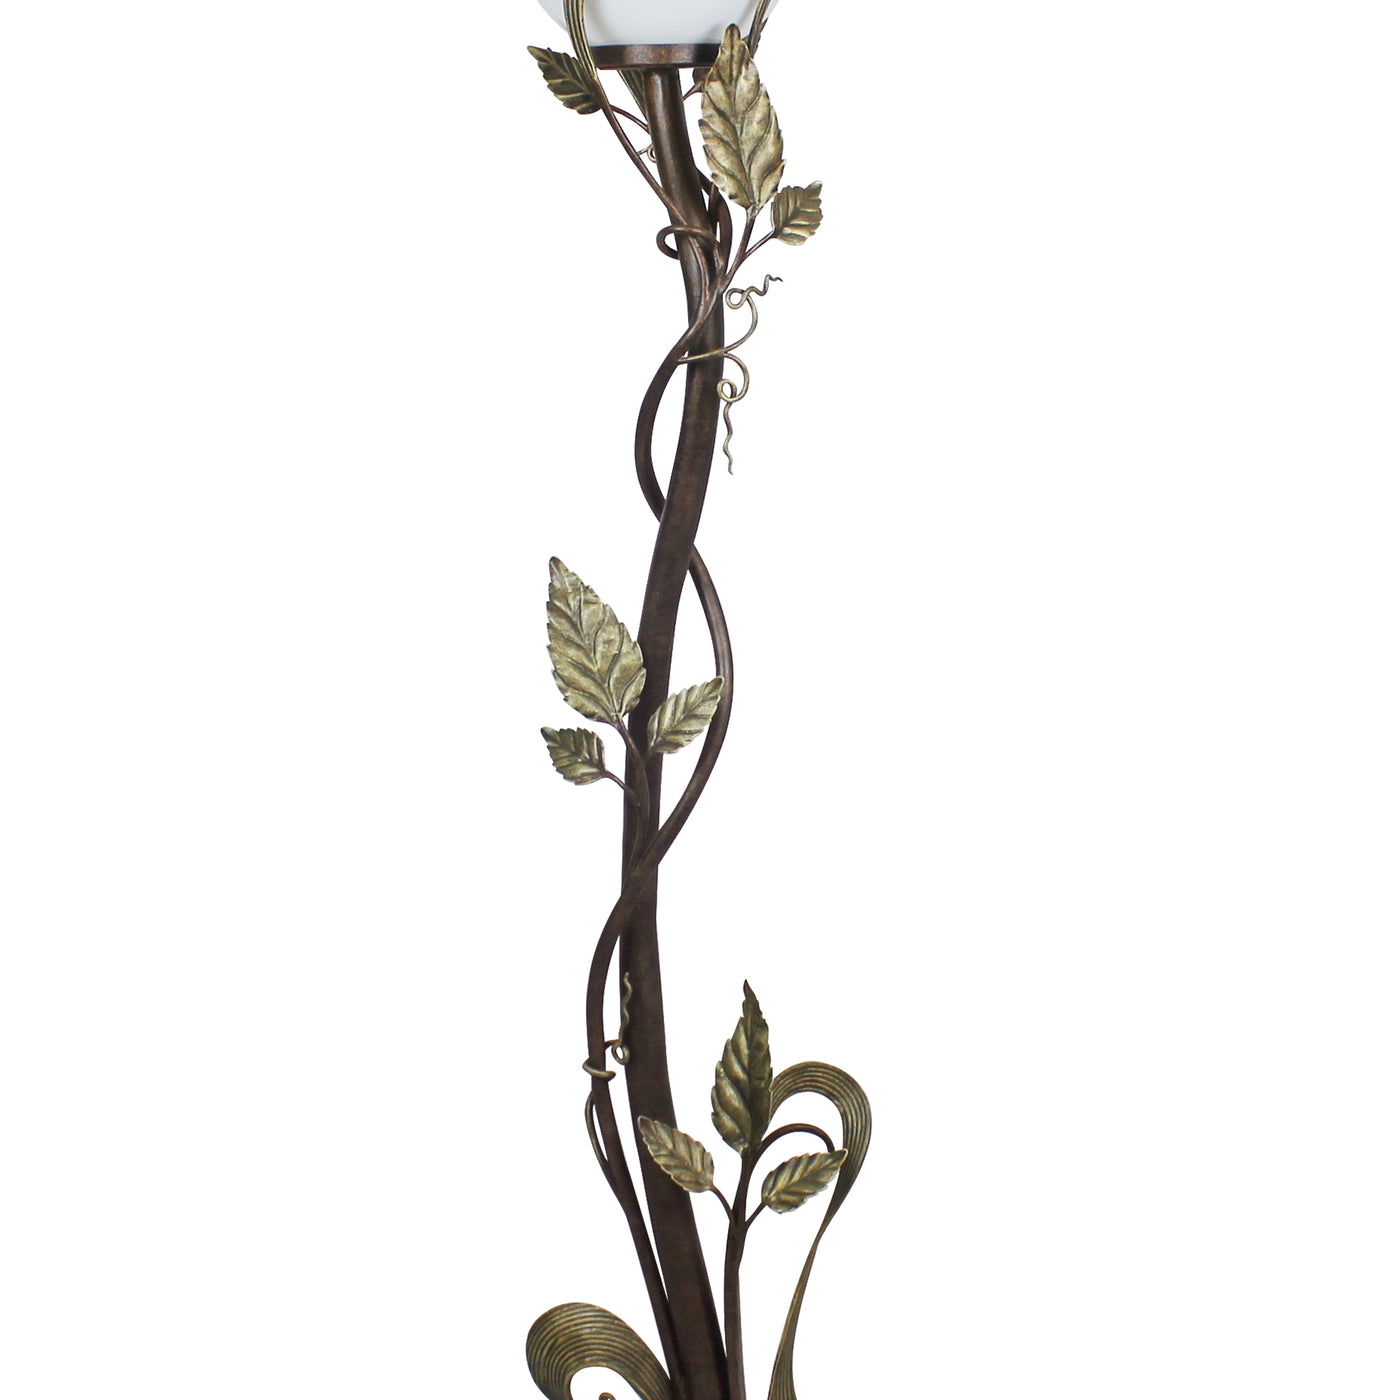 Body of a luxurious wrought iron decorative floor lamp made up of handmade stems and leaves, painted in an antique bronze finish